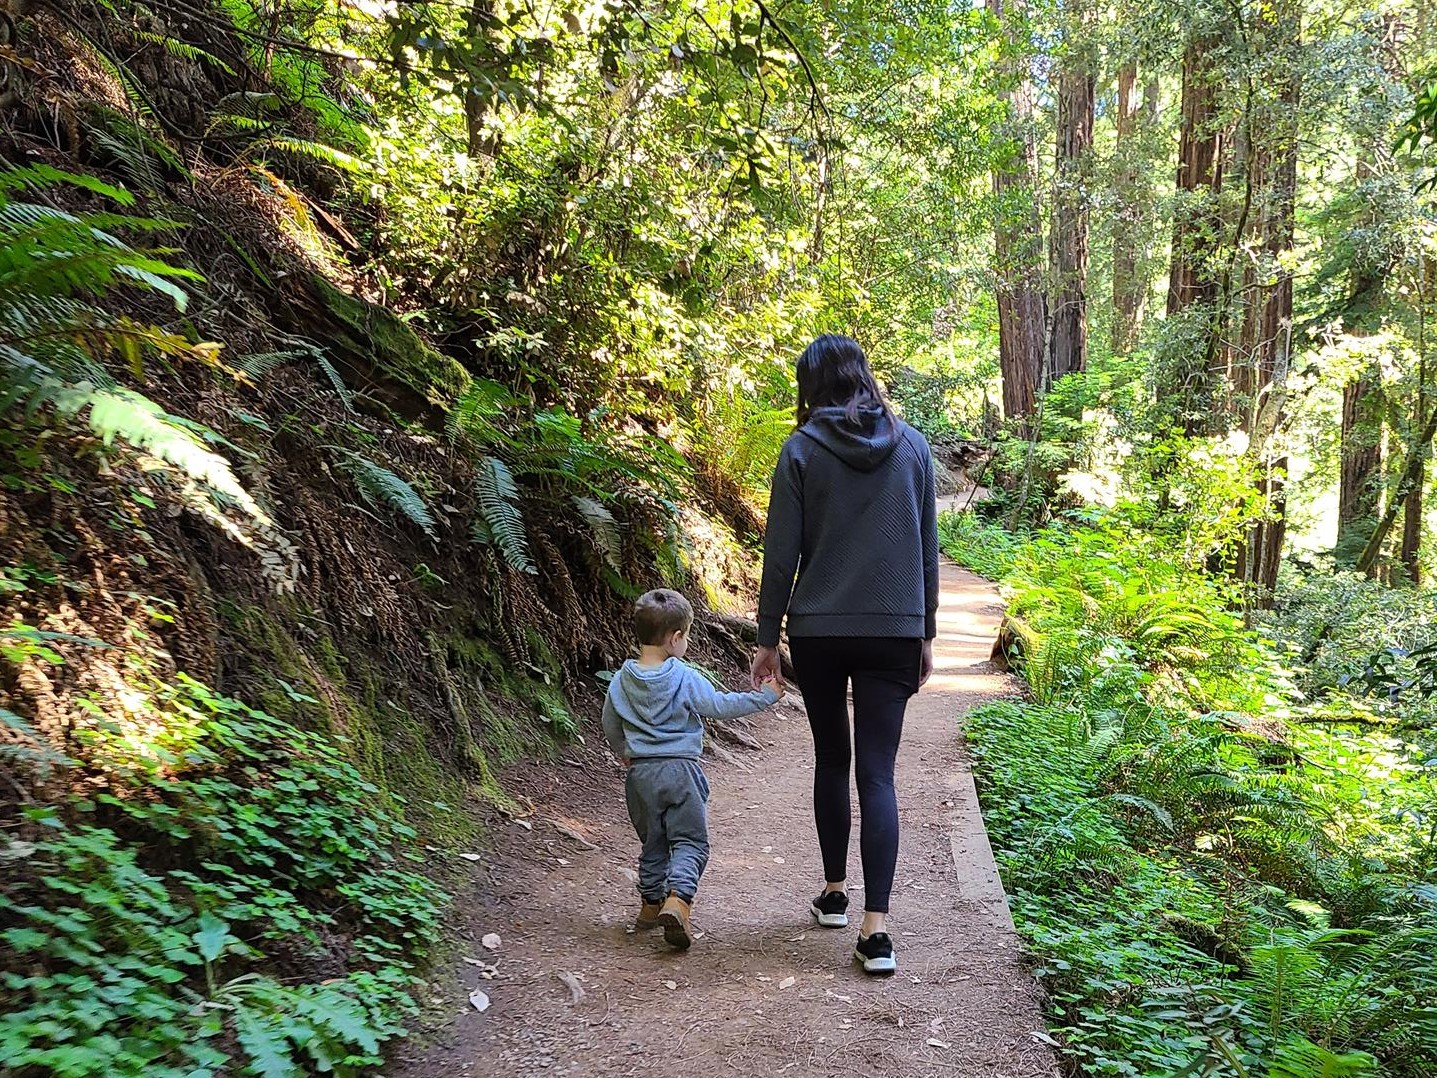 Eco-friendly Travel Tips for Families - Hiking Around National Parks